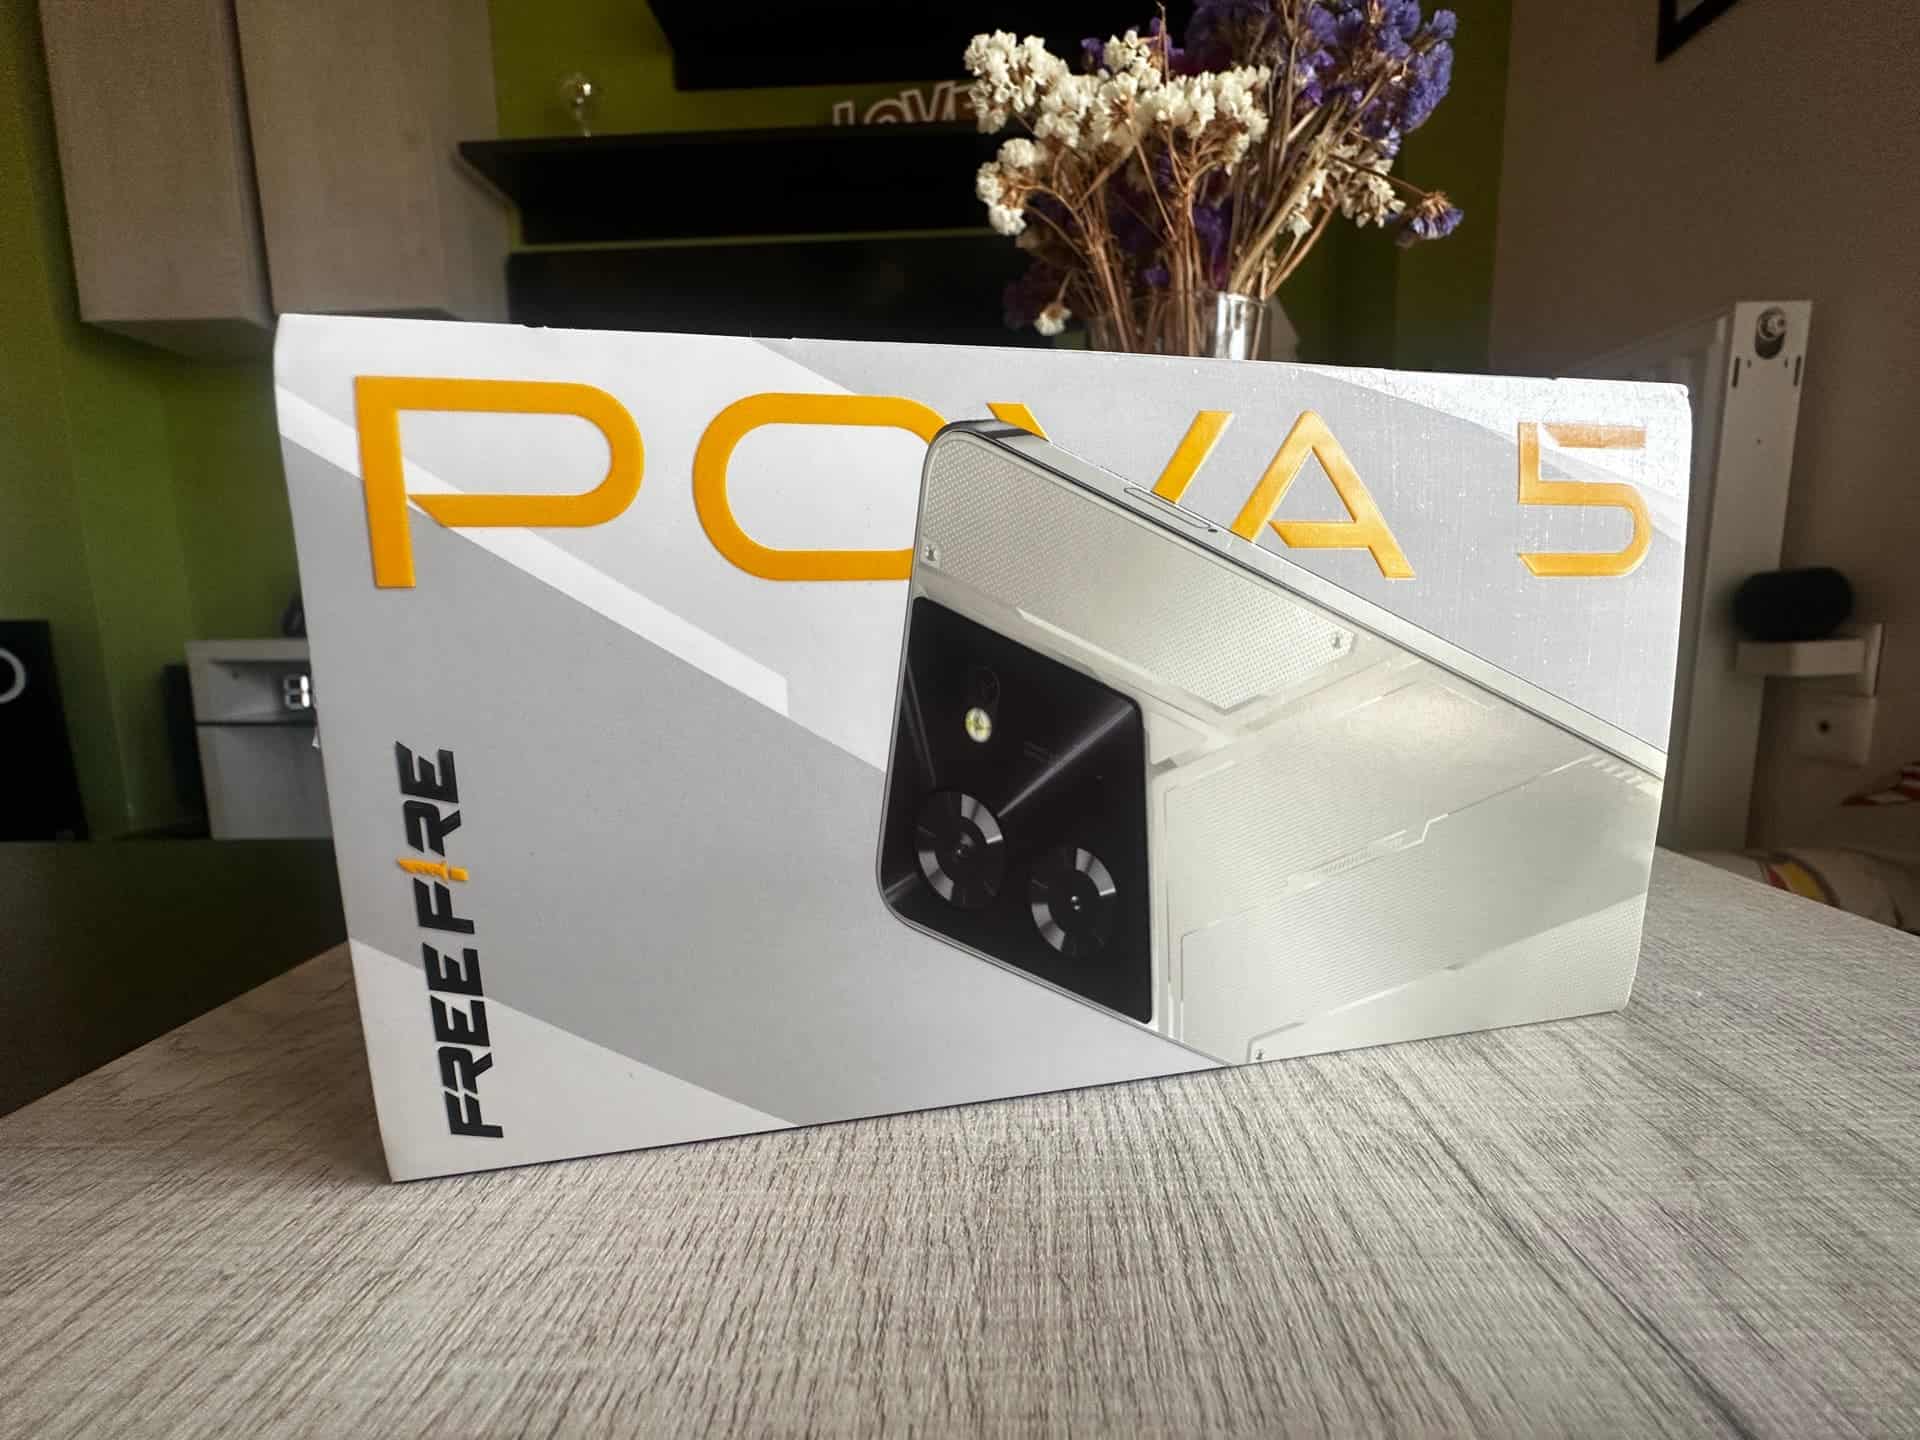 TECNO POVA 5 Pro review: Light up, without burning a hole! - The